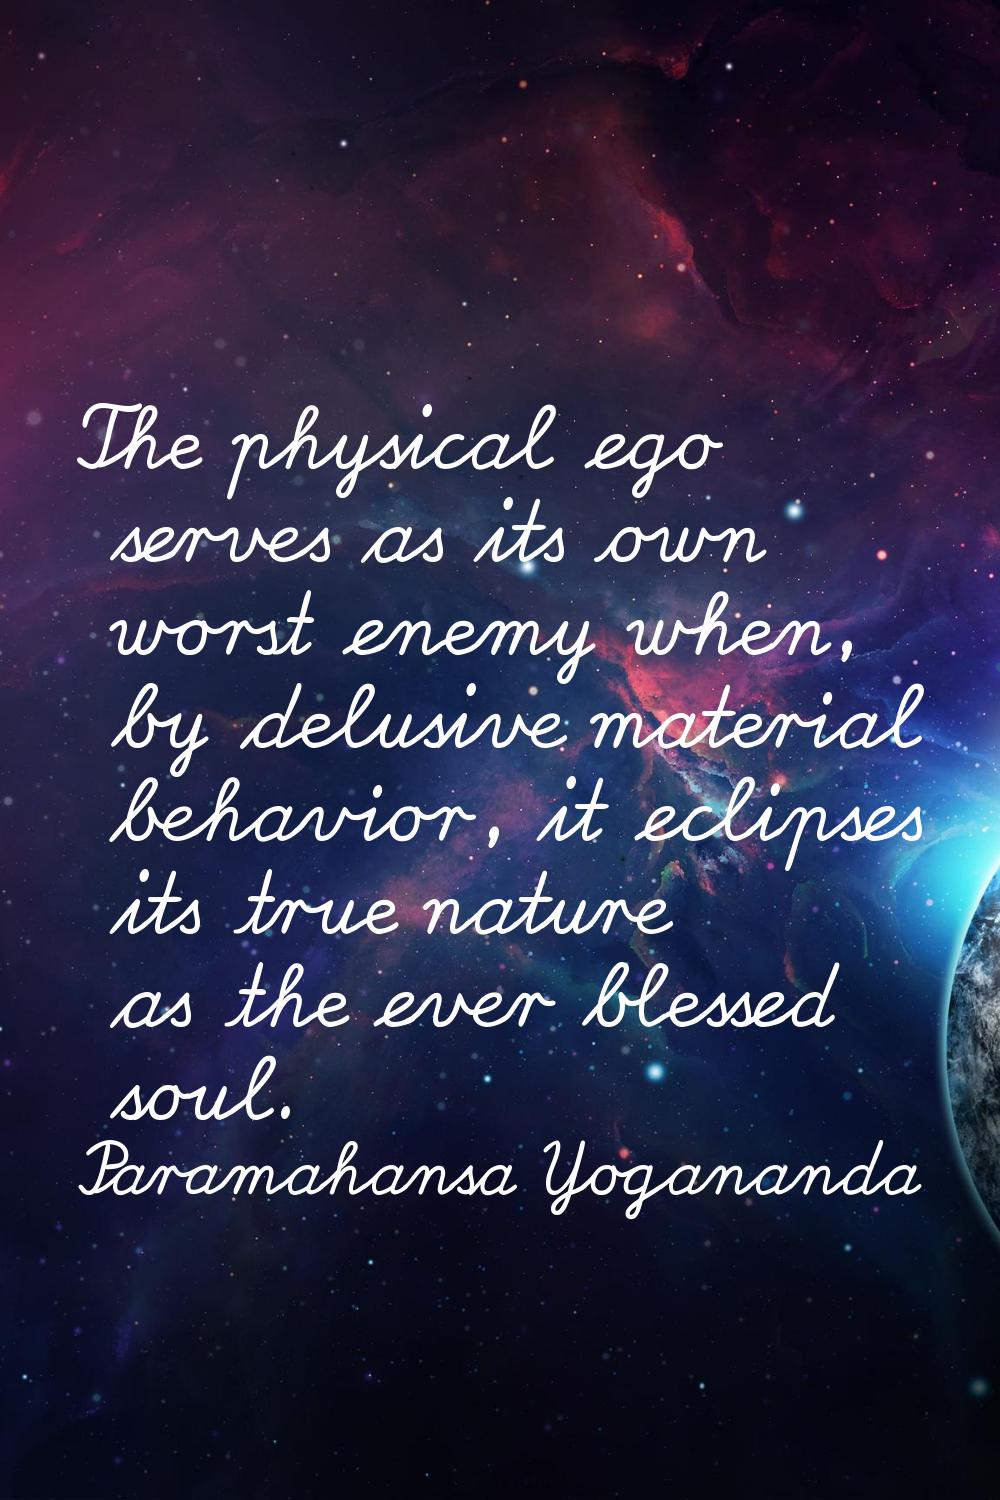 The physical ego serves as its own worst enemy when, by delusive material behavior, it eclipses its